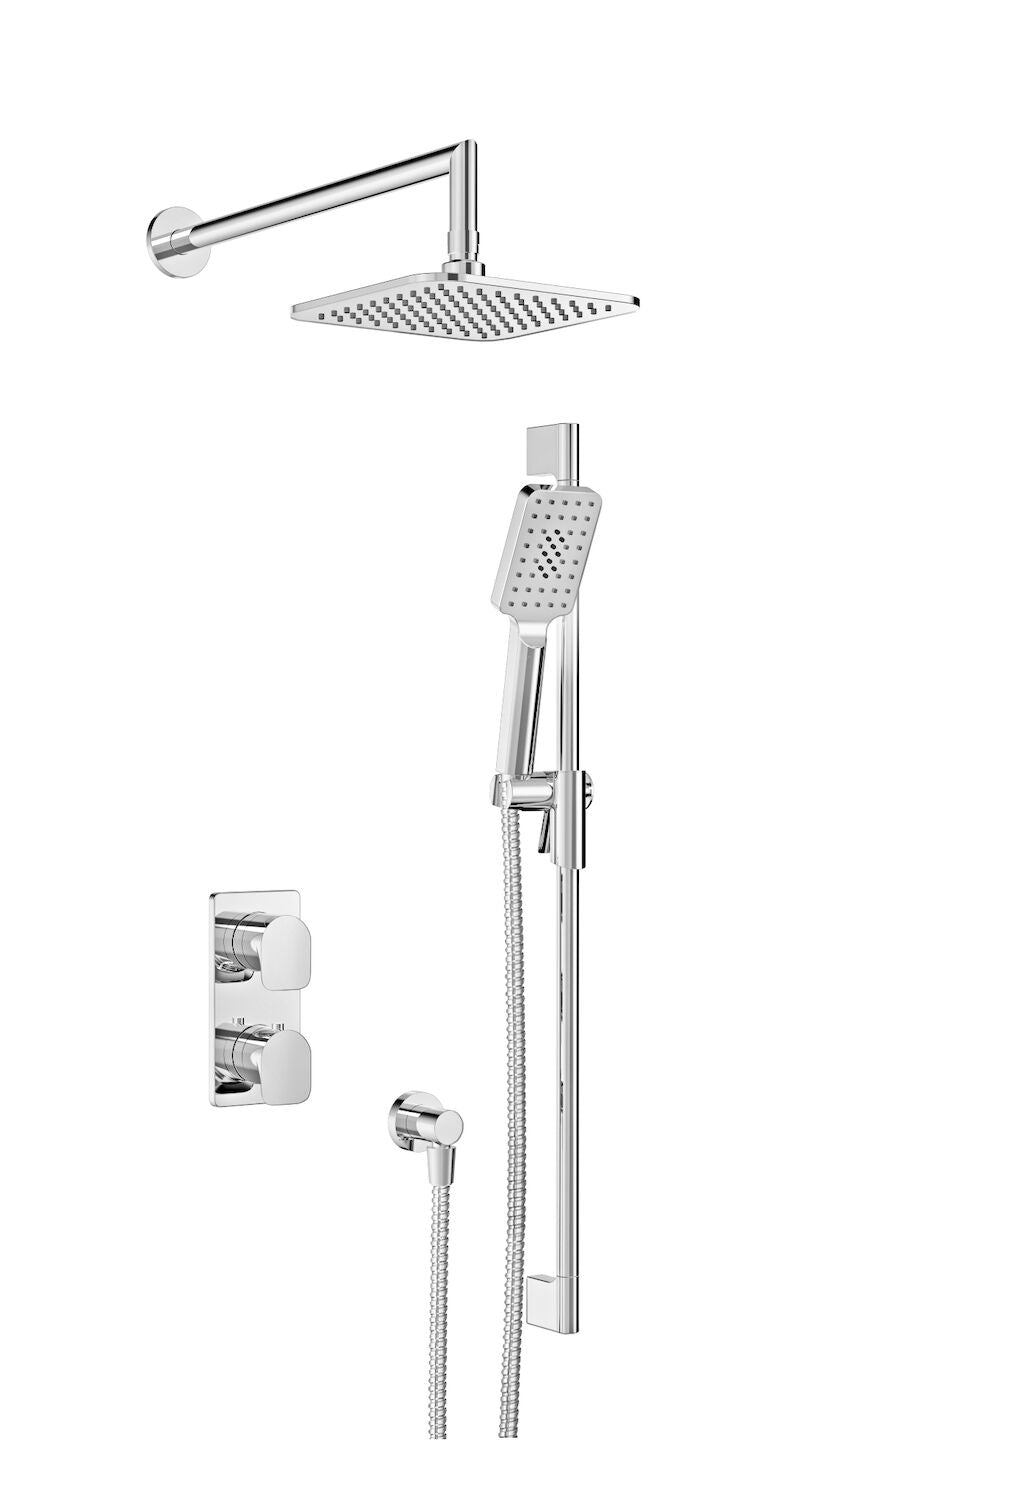 PETITE B04 COMPLETE 2-FUNCTION THERMOSTATIC PRESSURE BALANCED SHOWER KIT